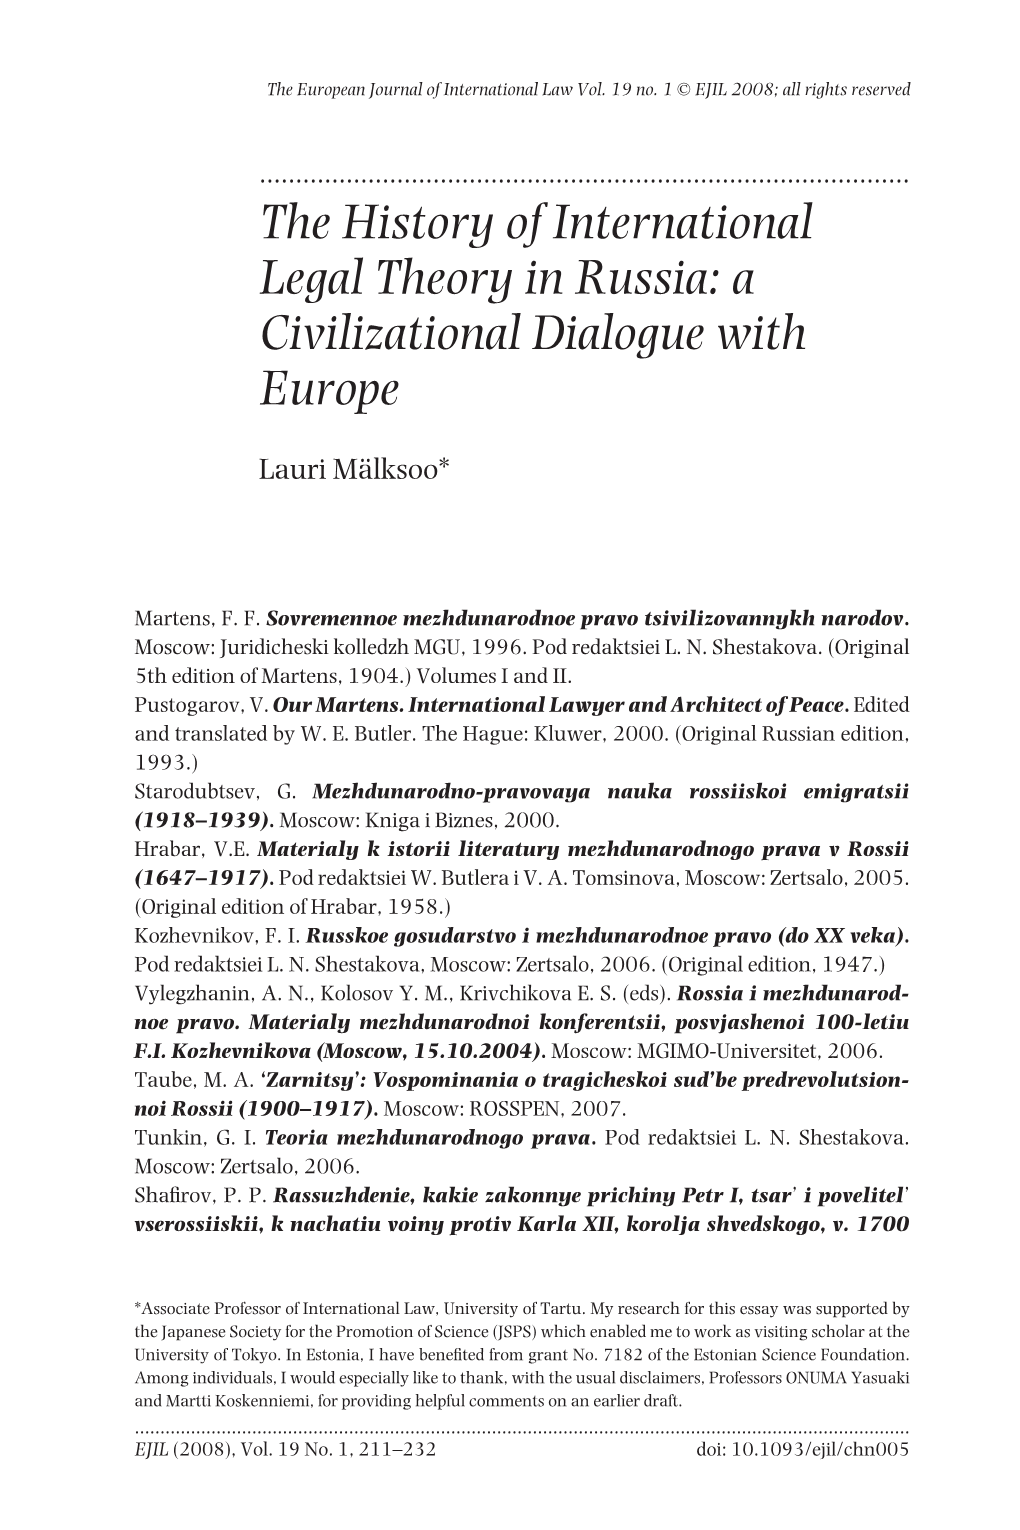 The History of International Legal Theory in Russia: a Civilizational Dialogue with Europe